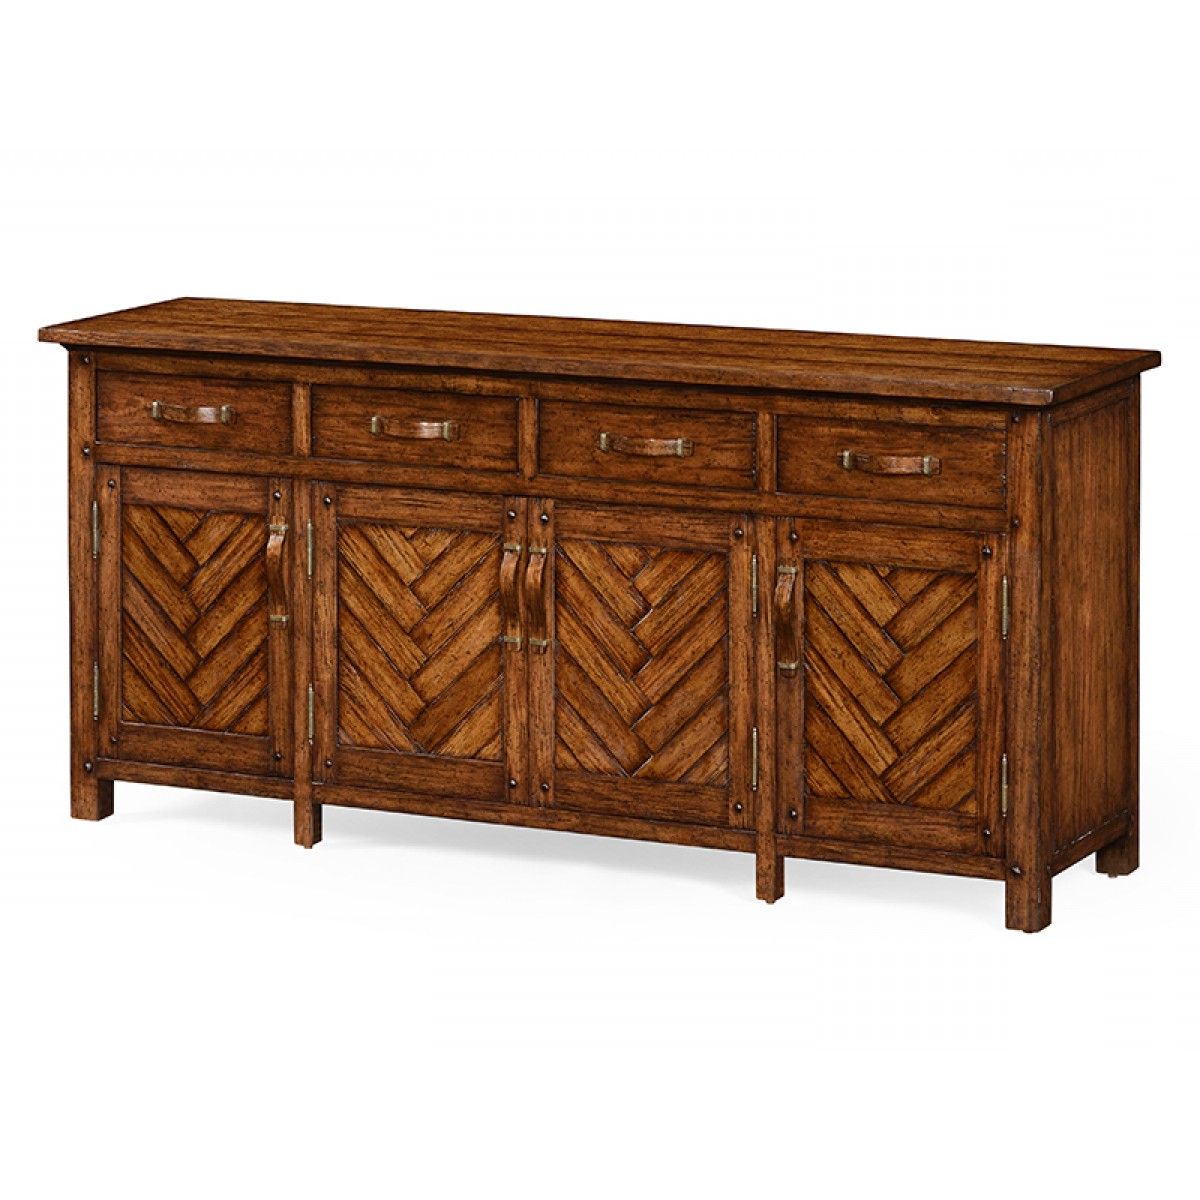 Jonathan Charles Heavily Distressed Parquet Sideboard With Strap Handles Intended For Most Current Parquet Sideboards (View 5 of 20)